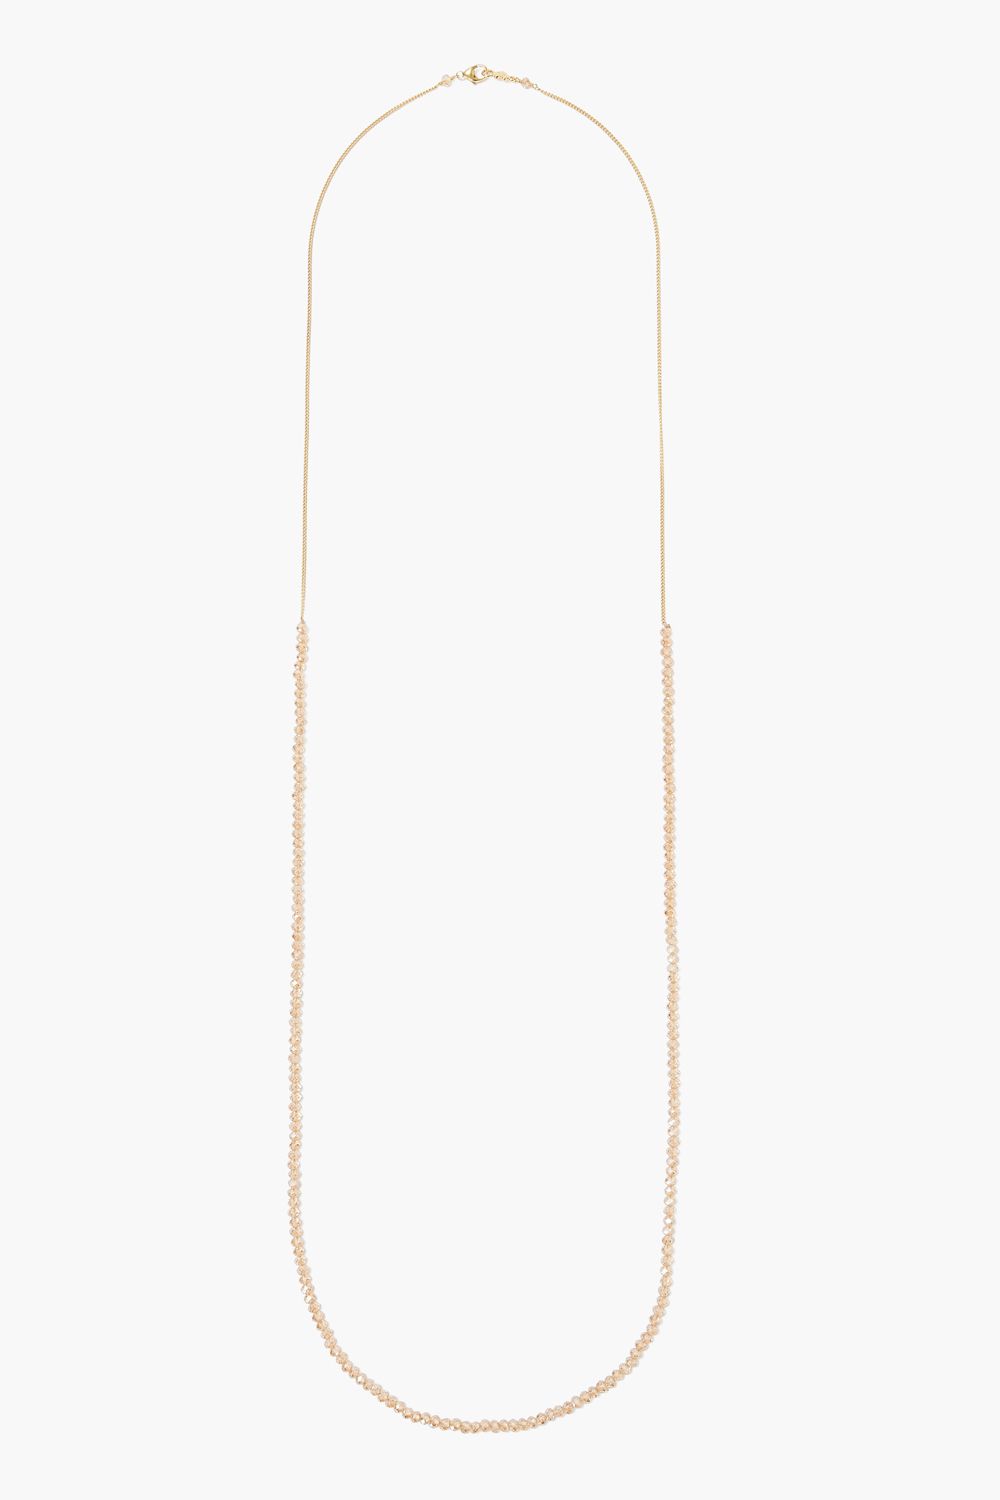 SUNFLOWER CRYSTAL LONG LAYERING NECKLACE - Kingfisher Road - Online Boutique